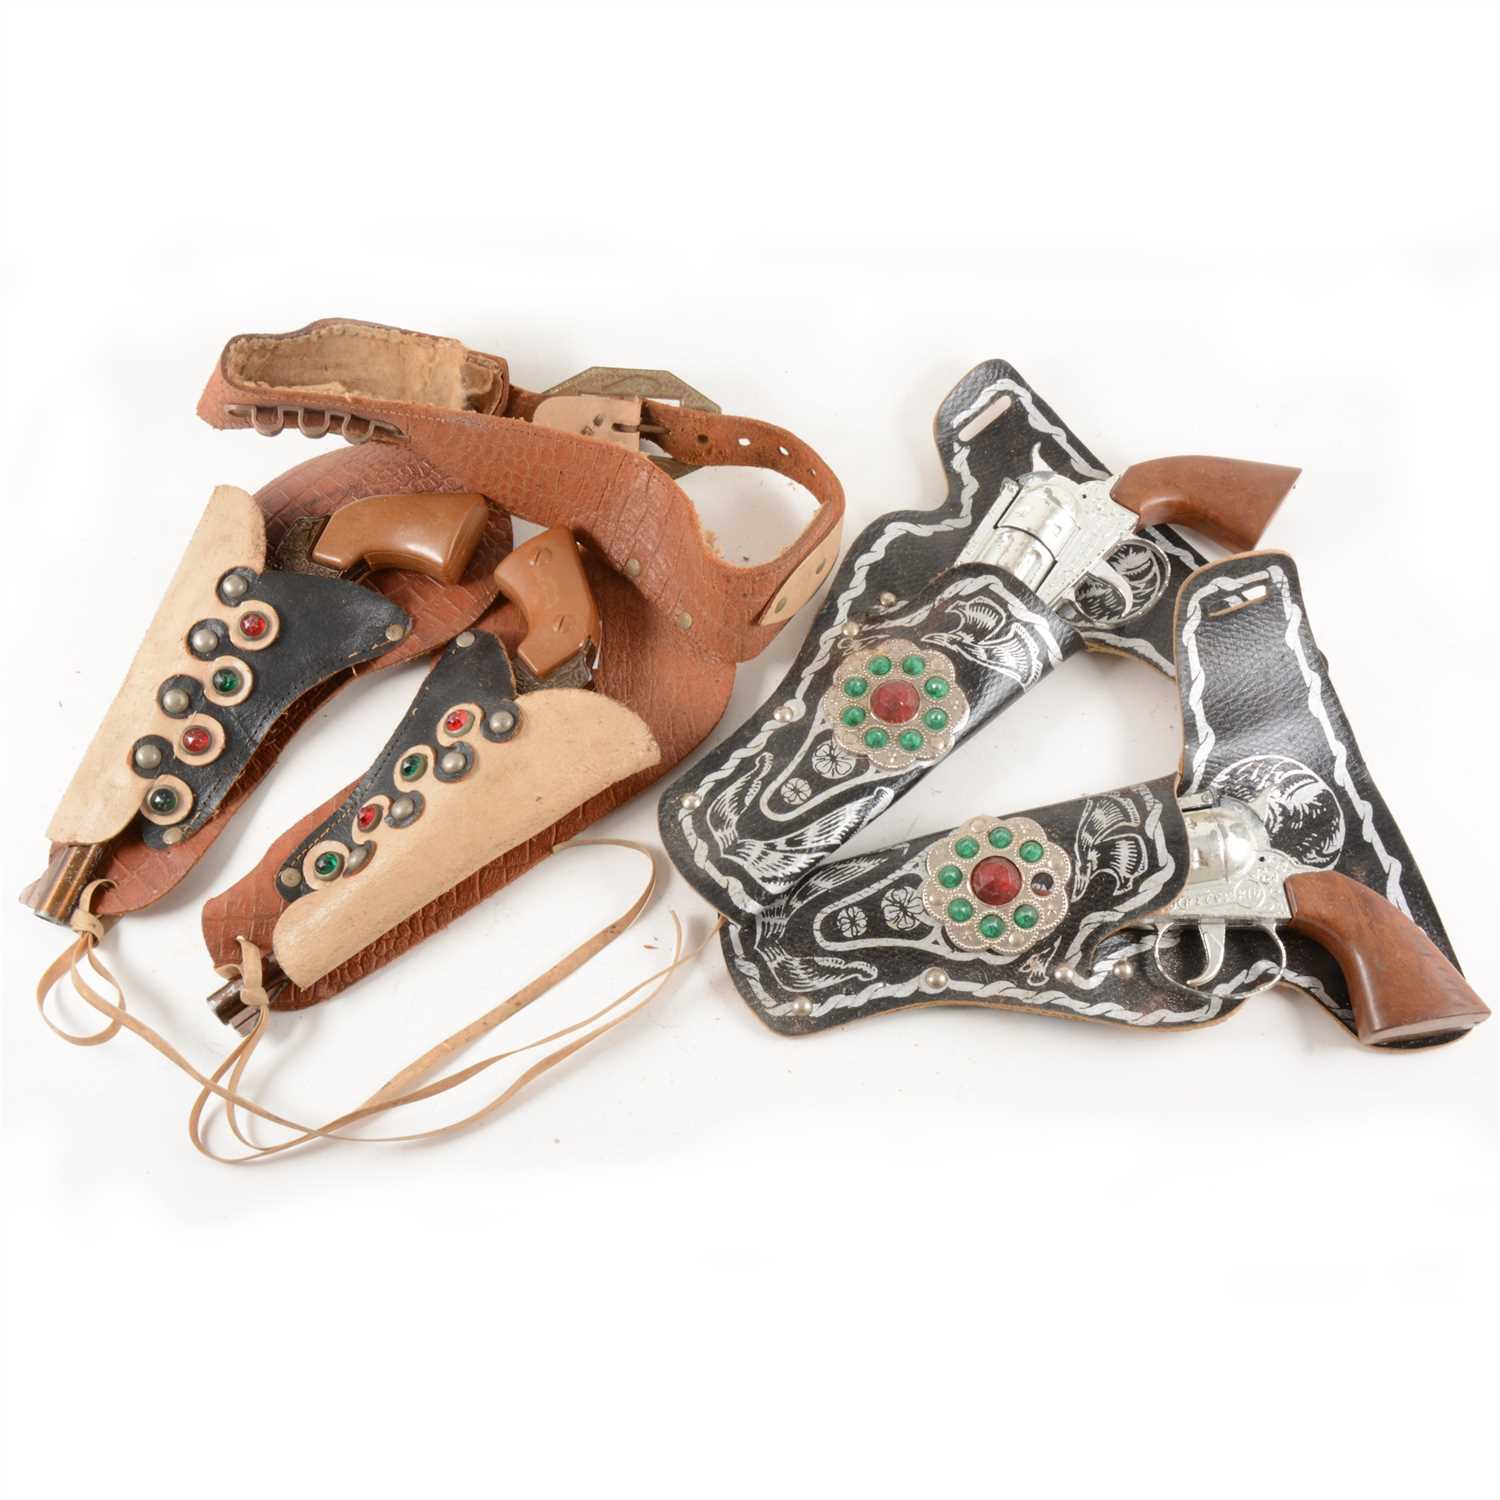 Lot 133 - Two pairs of Lone Star Wild West type revolvers in pouches; including the Super Cowboy, and the Pecos Kid.